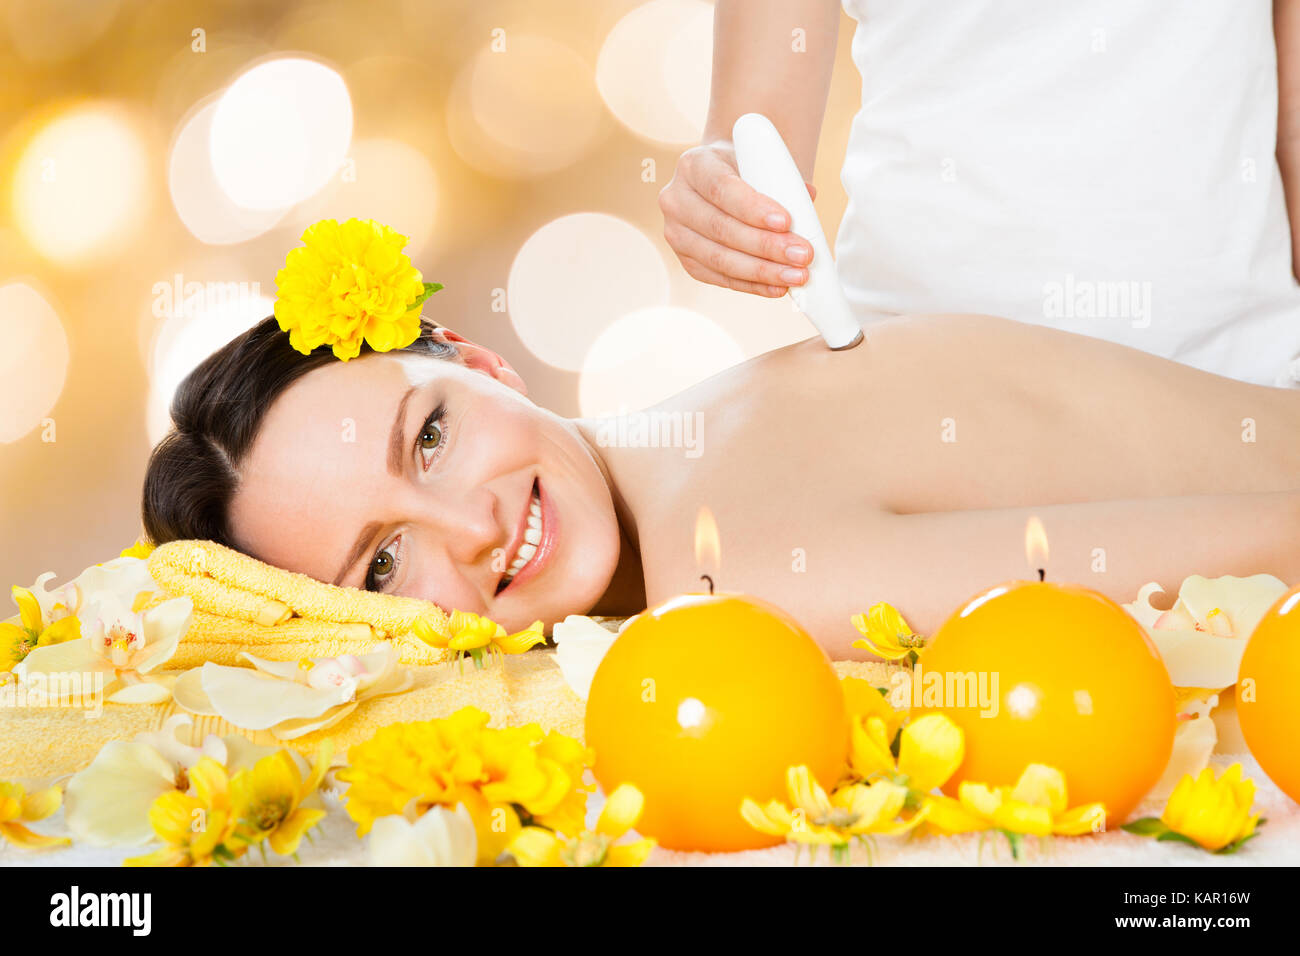 Portrait of beautiful young woman receiving microdermabrasion therapy at beauty spa Stock Photo